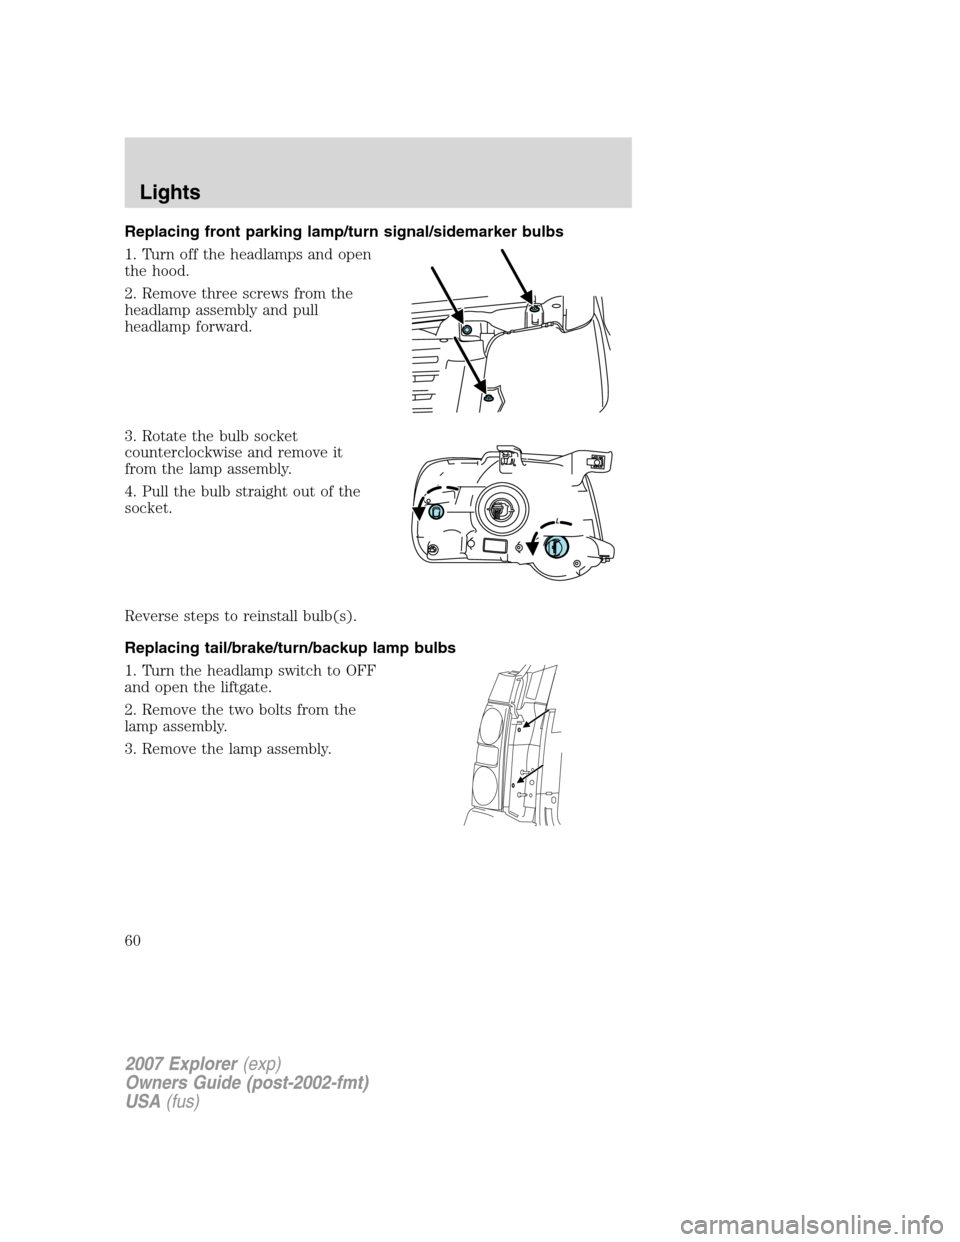 FORD EXPLORER 2007 4.G Owners Manual Replacing front parking lamp/turn signal/sidemarker bulbs
1. Turn off the headlamps and open
the hood.
2. Remove three screws from the
headlamp assembly and pull
headlamp forward.
3. Rotate the bulb s